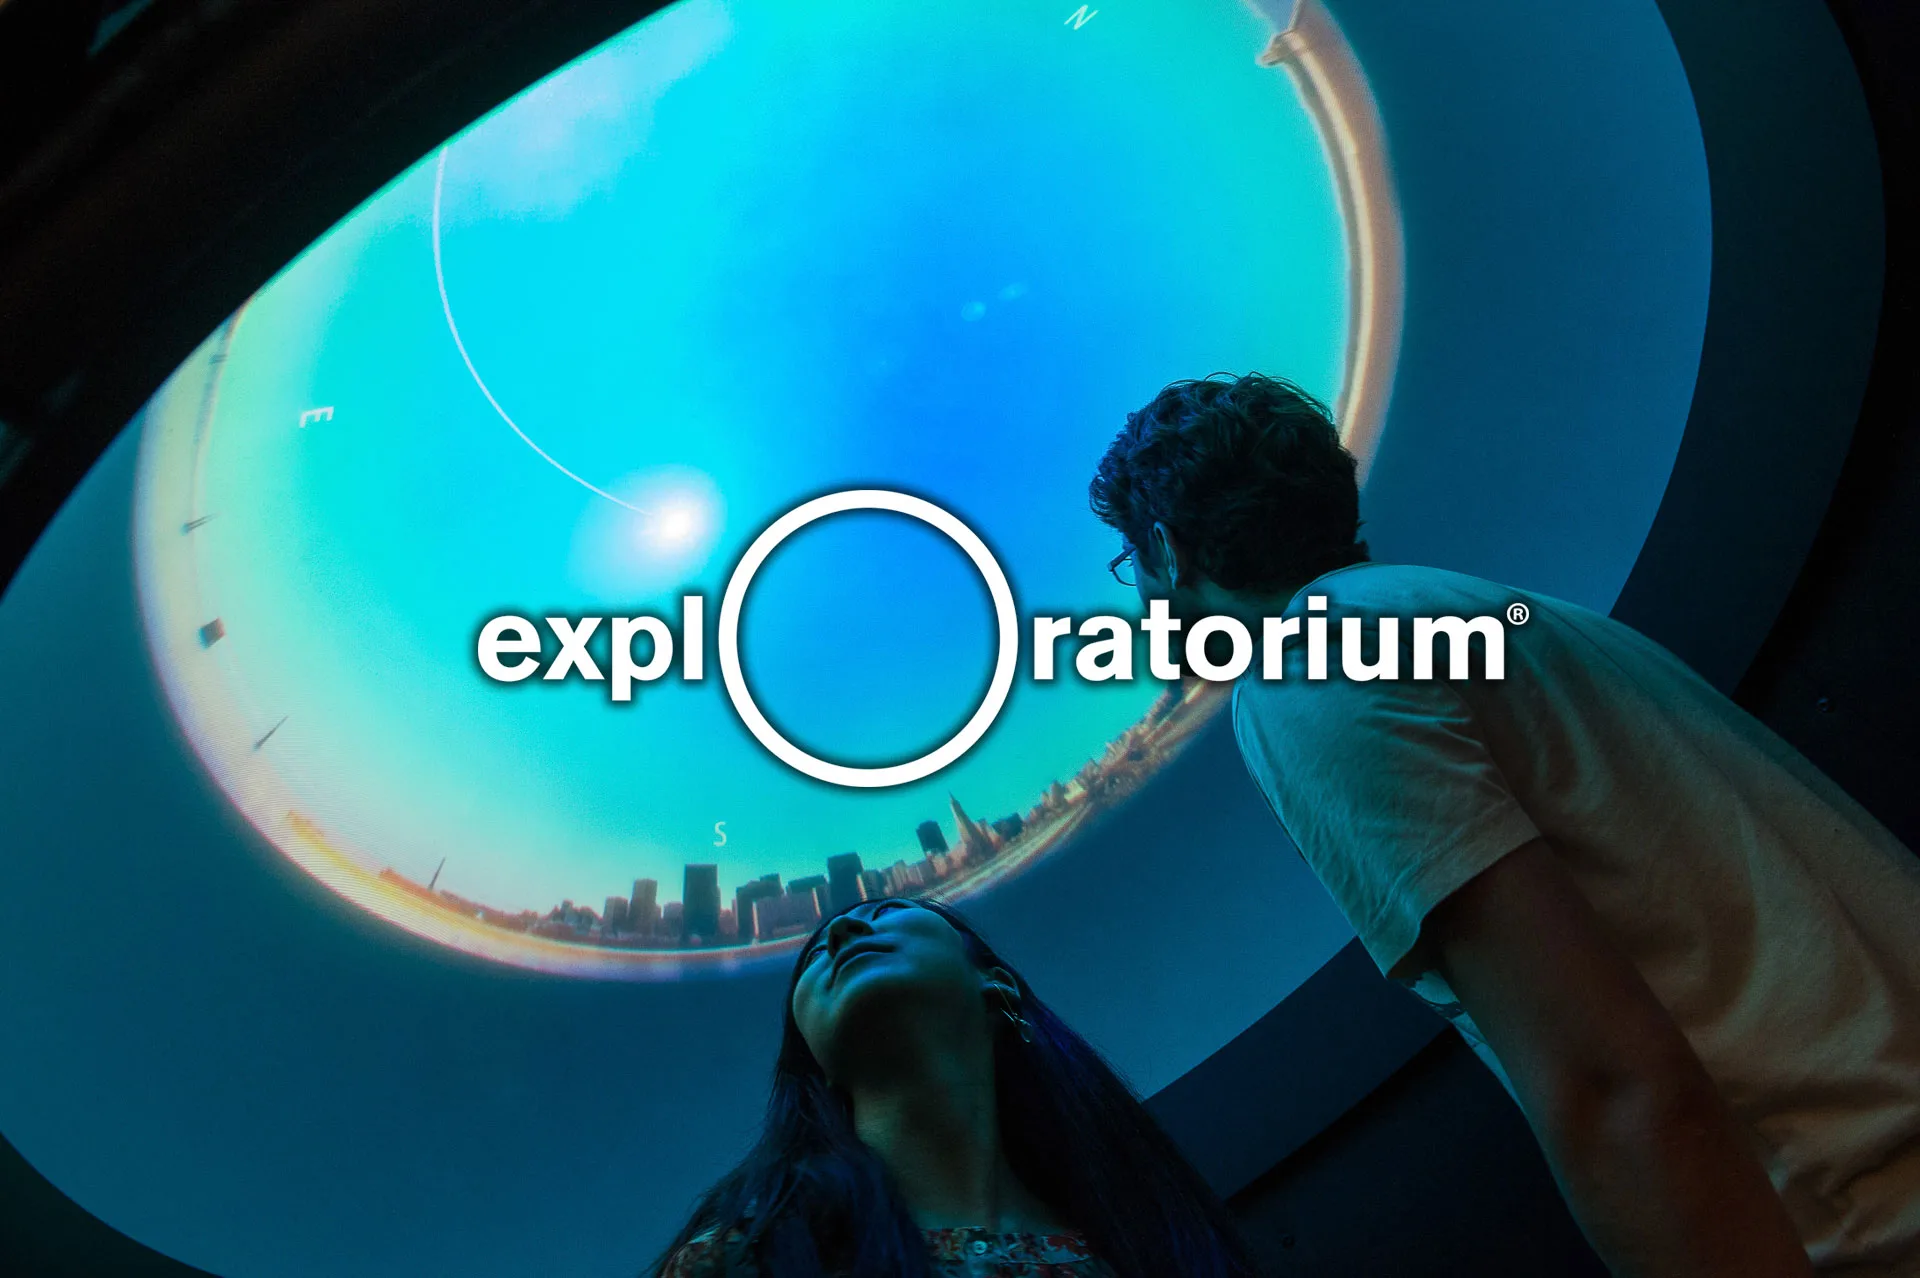 Image: Exploratorium logo with image of visitors looking at an exhibit